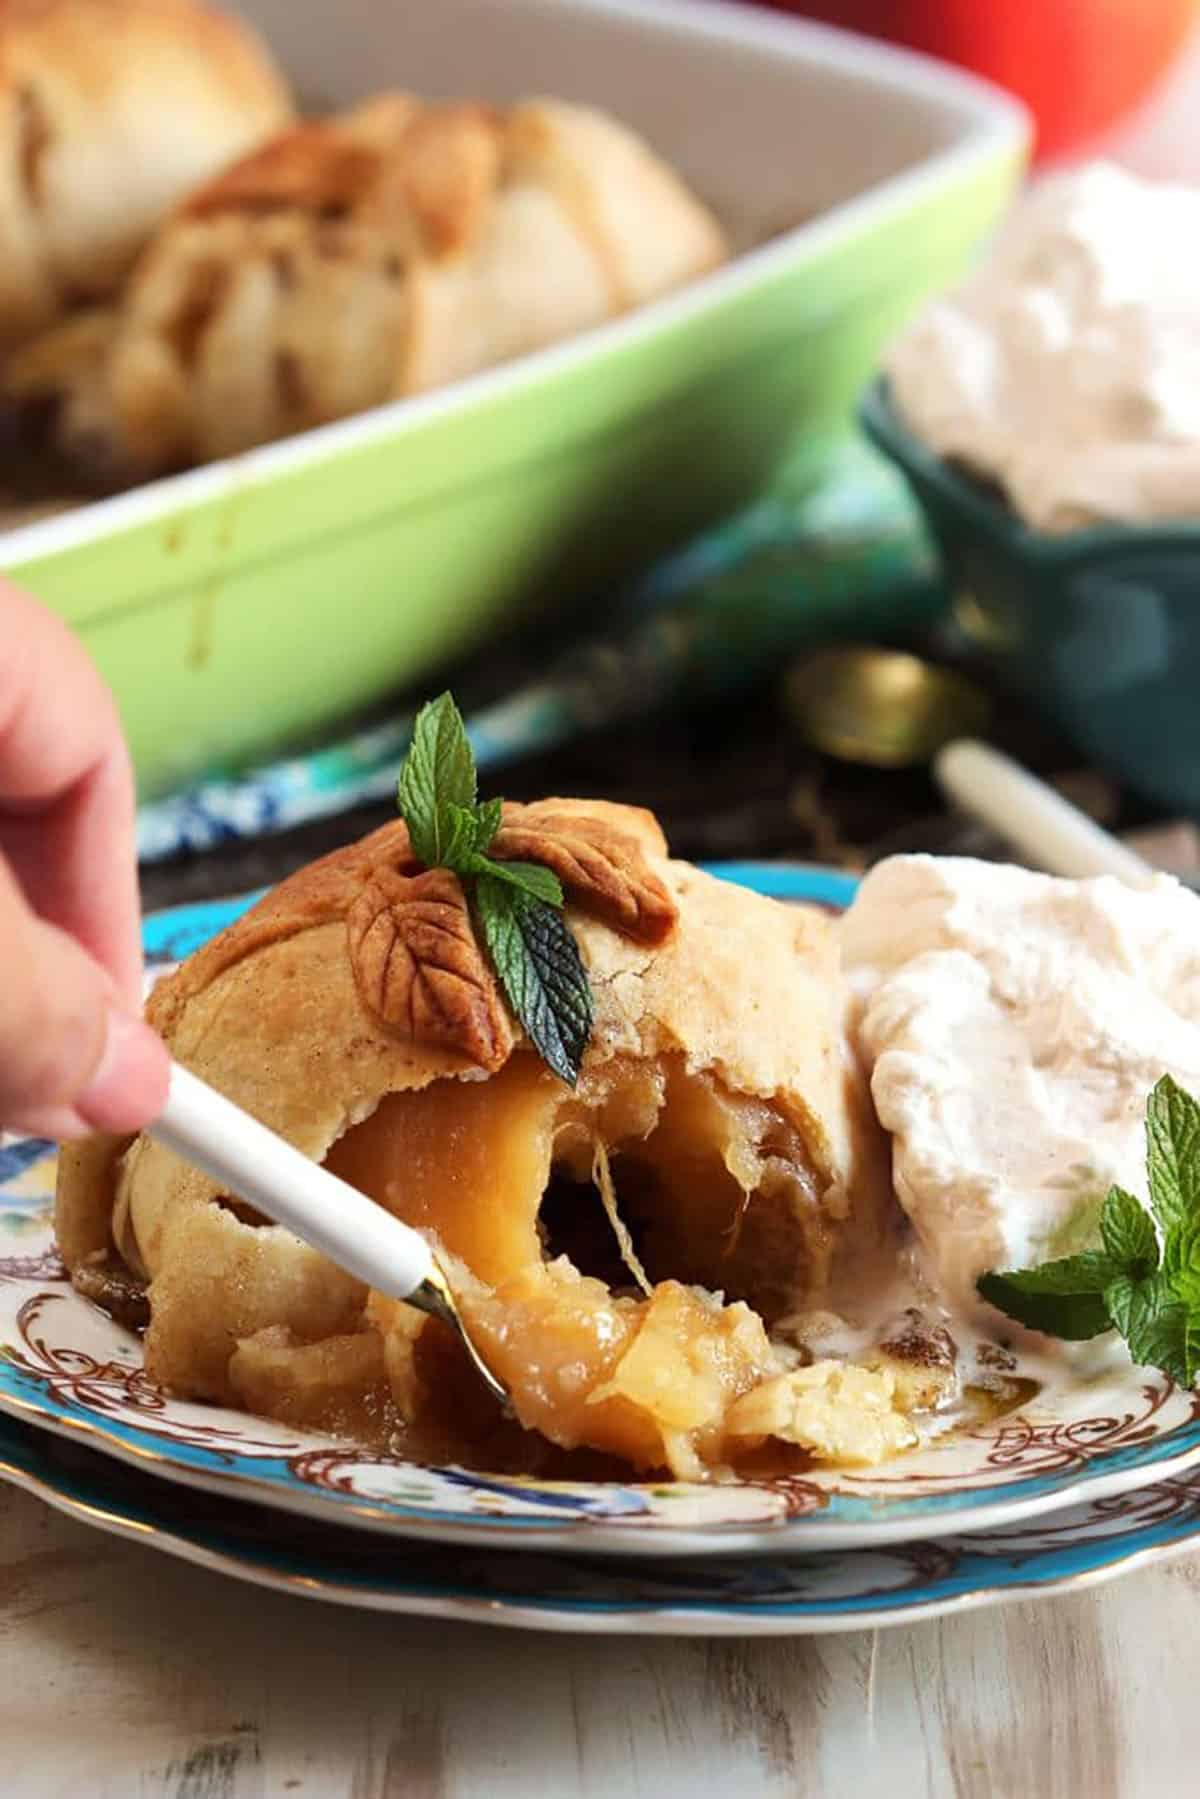 Apple Dumpling being cut into with a spoon.